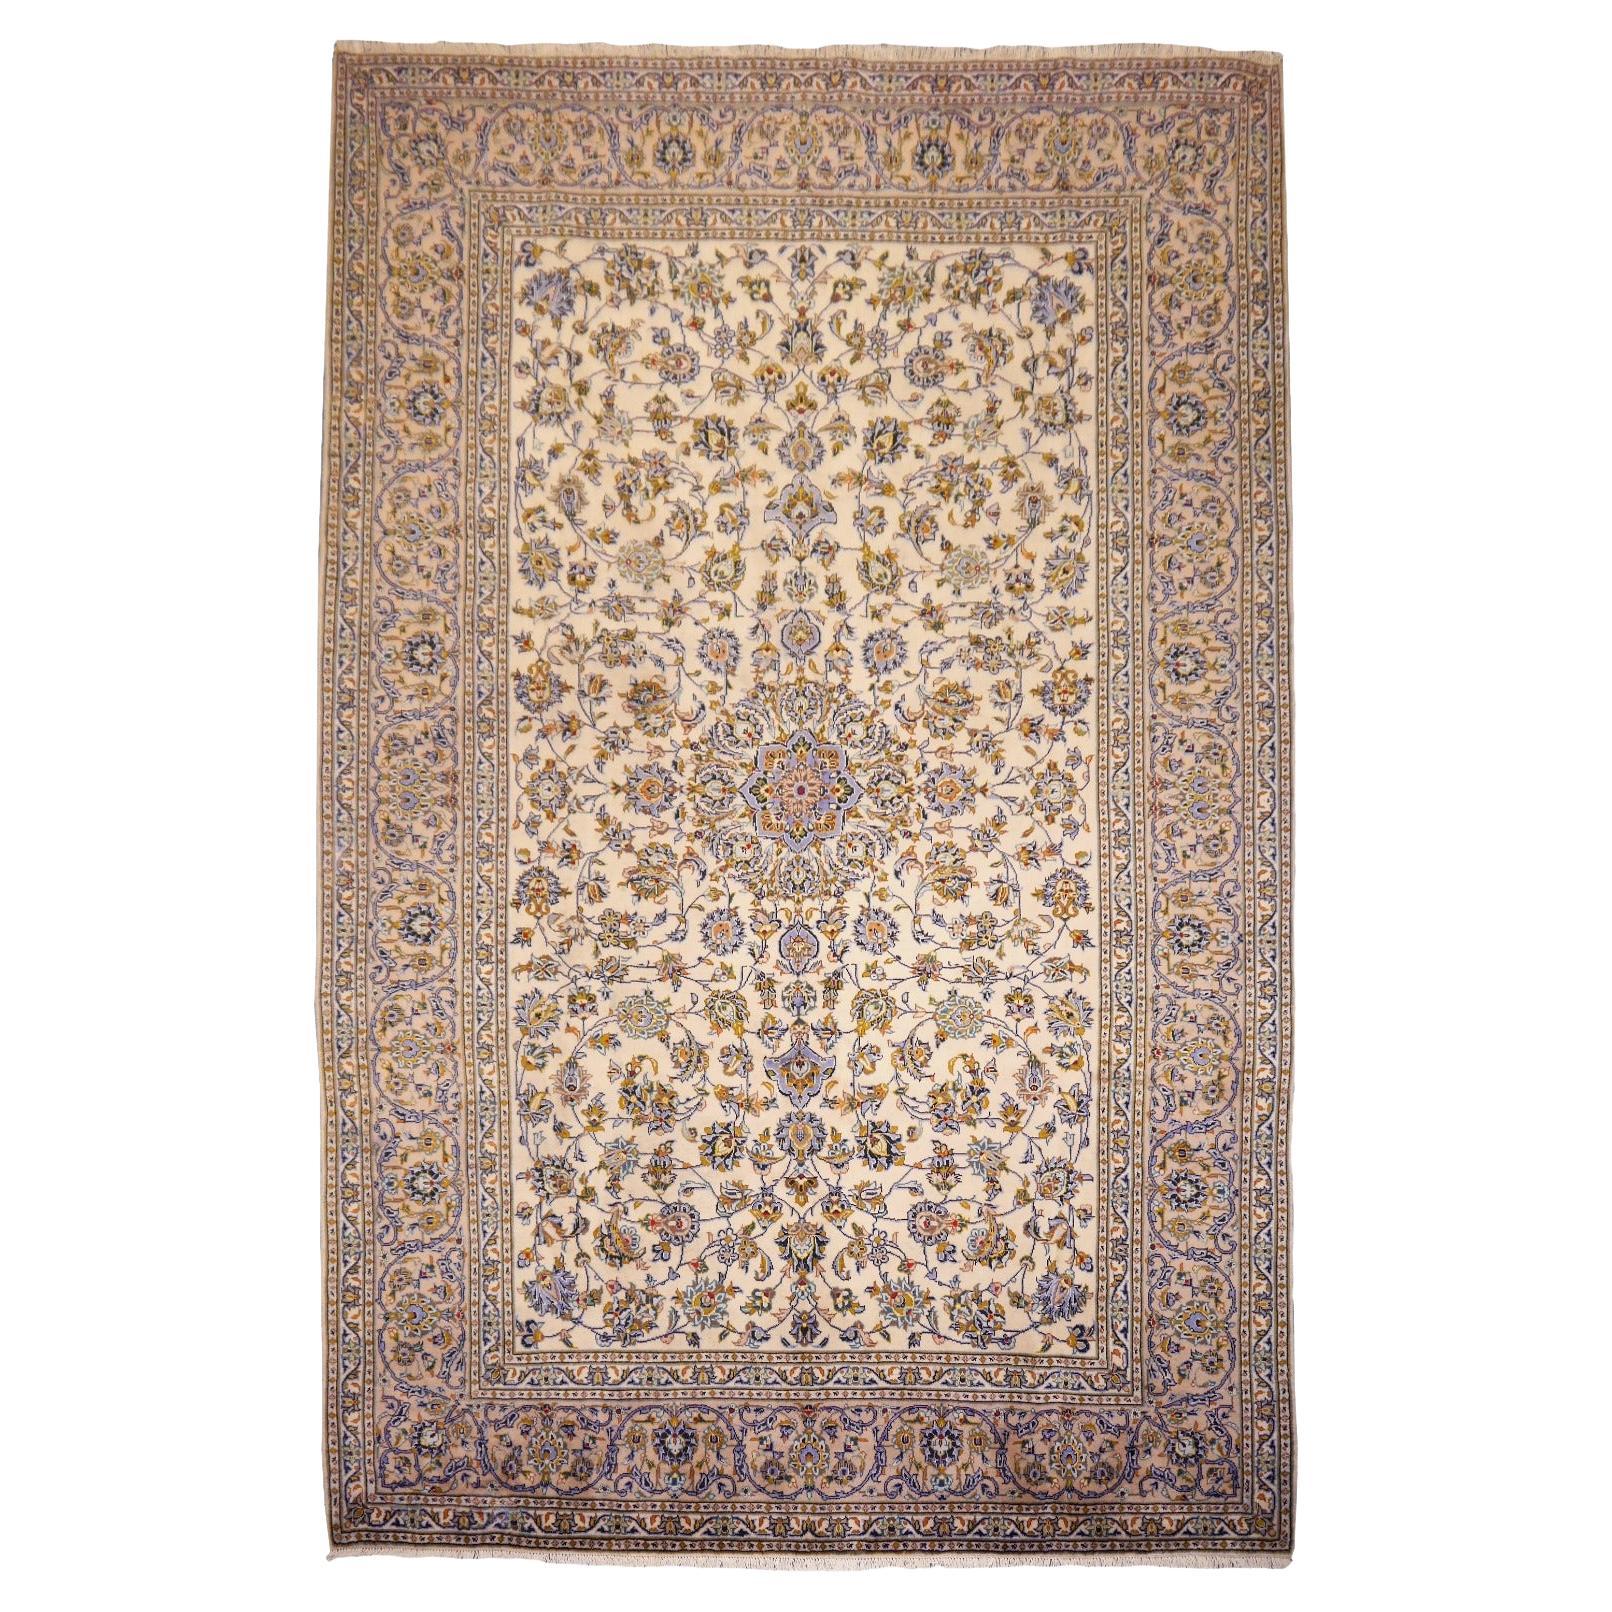 Classic Vintage Rug 12 x 8 ft hand knotted in beige and blue For Sale